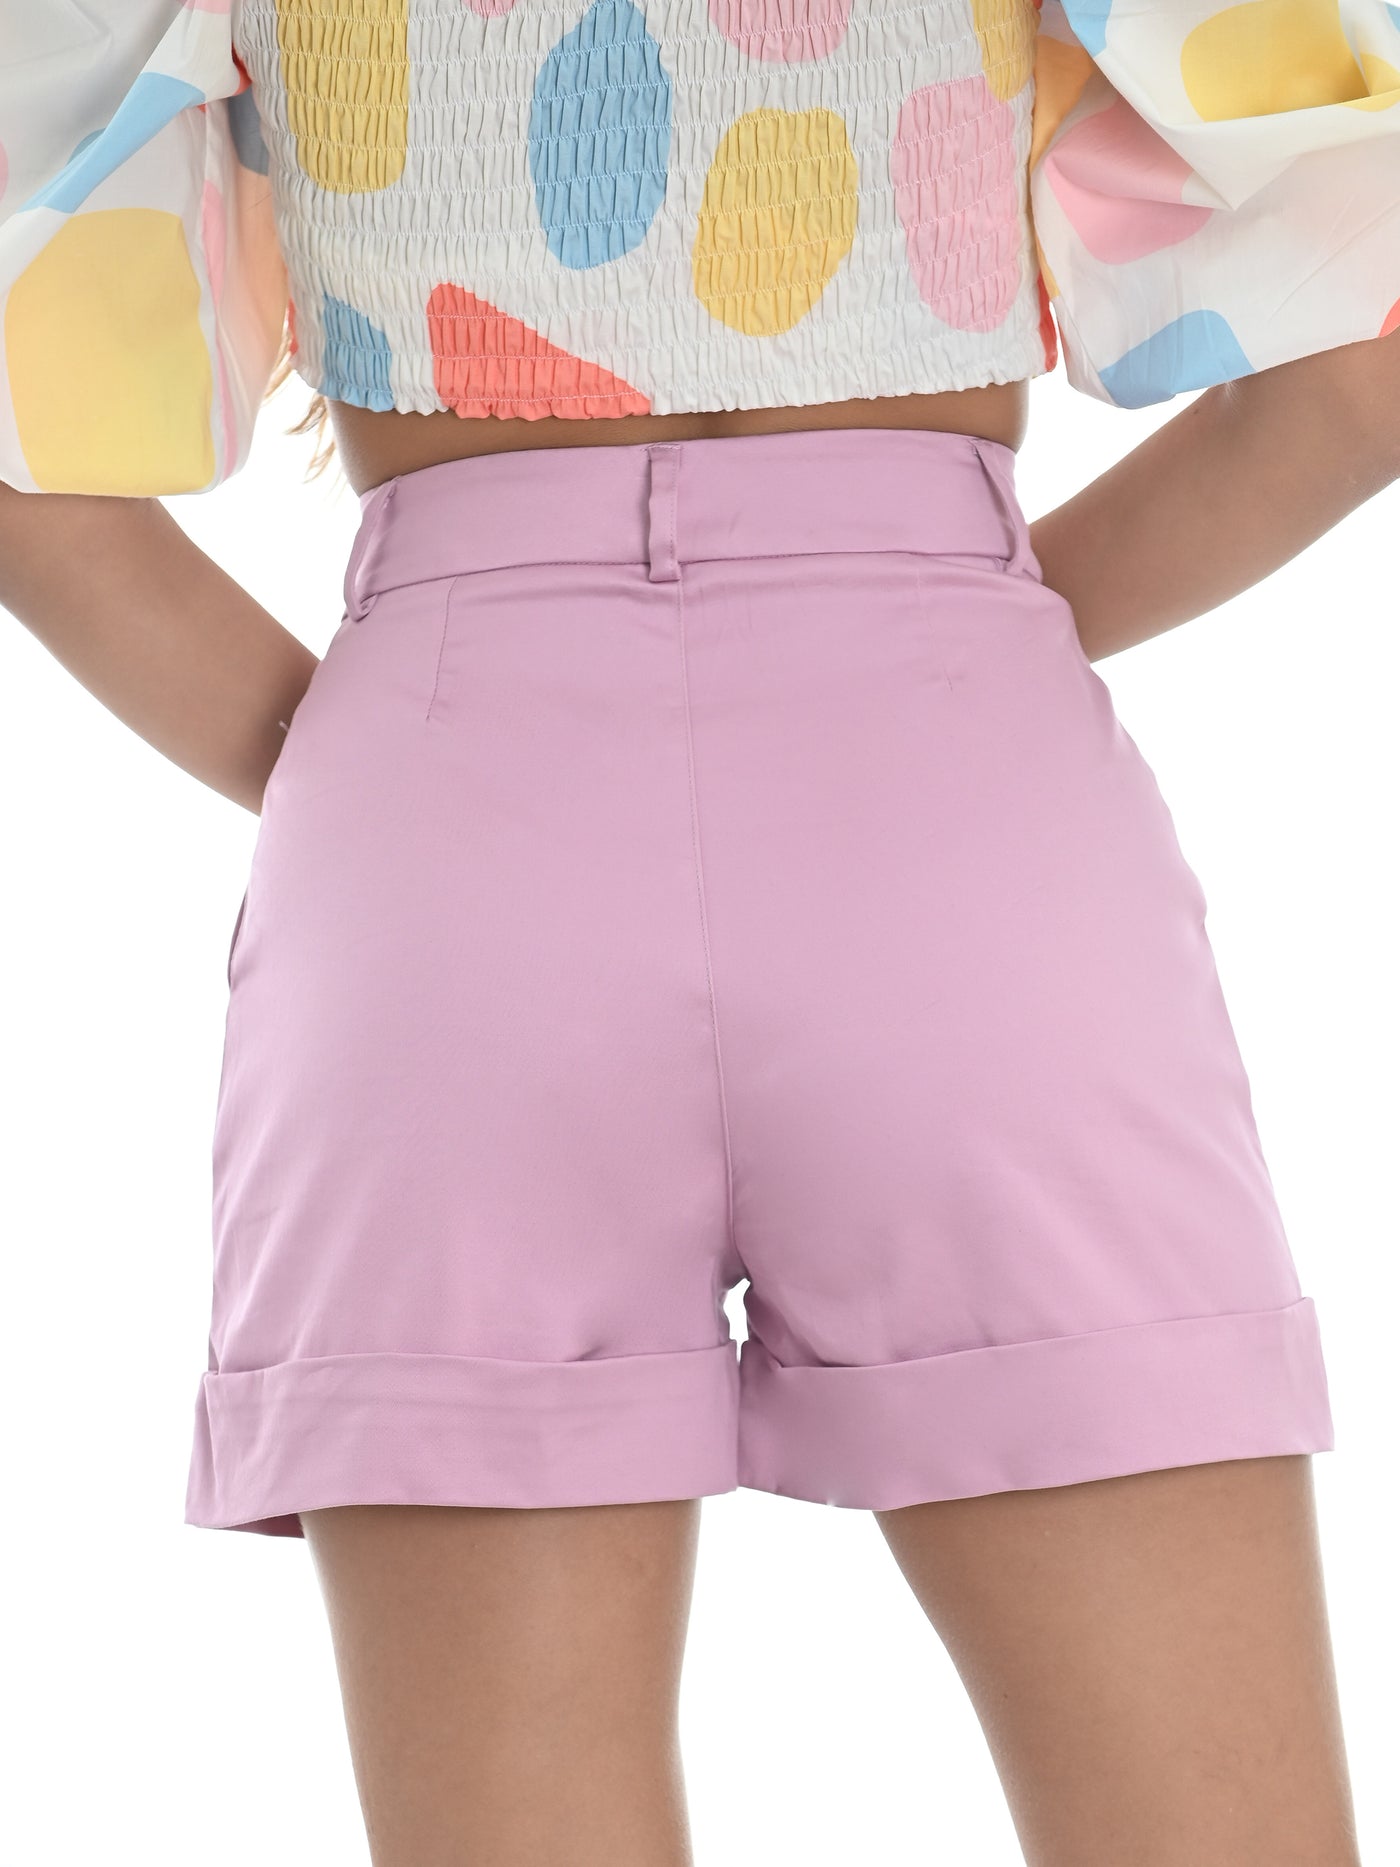 Short Lidia, Free Store Col